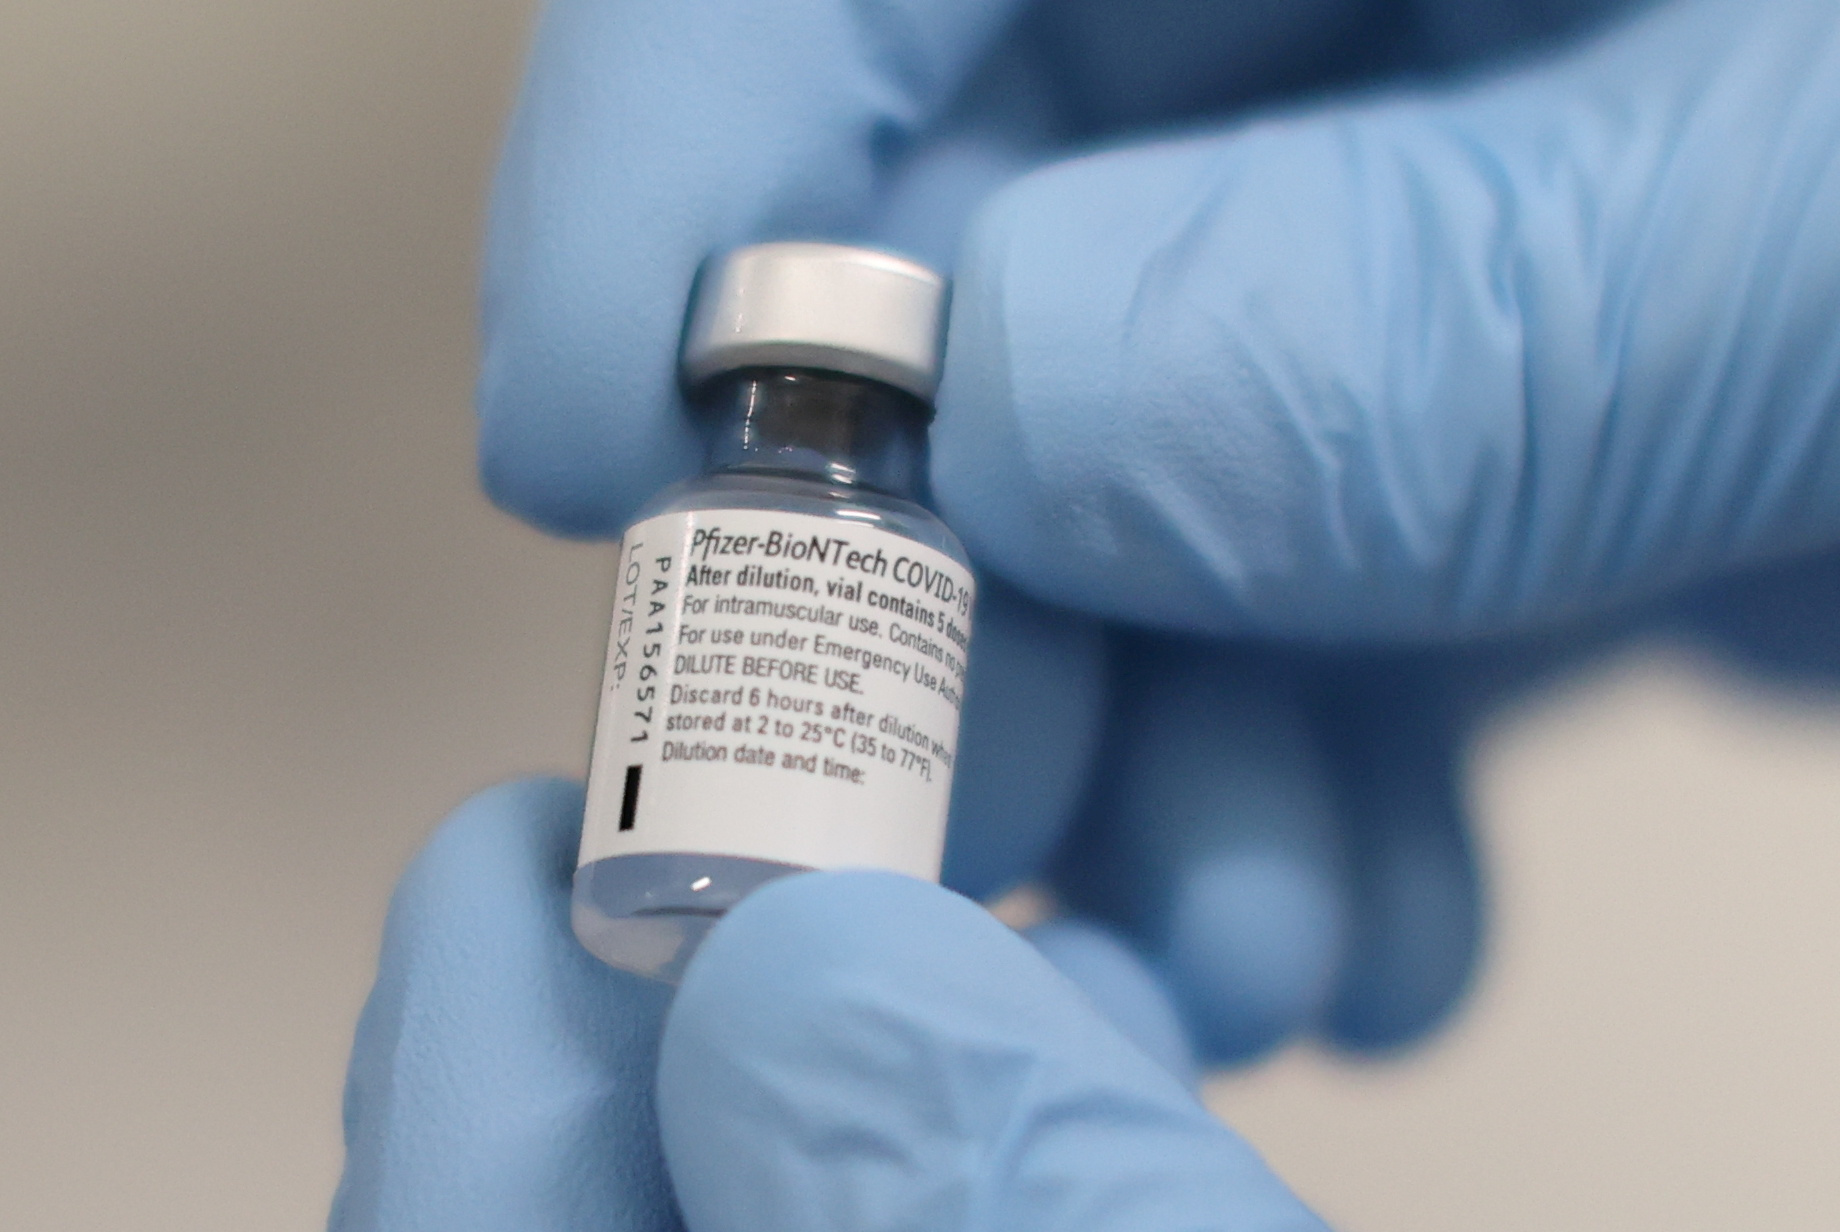 A phial of the Pfizer/BioNTech COVID-19 vaccine is seen at the Royal Victoria Hospital in Belfast